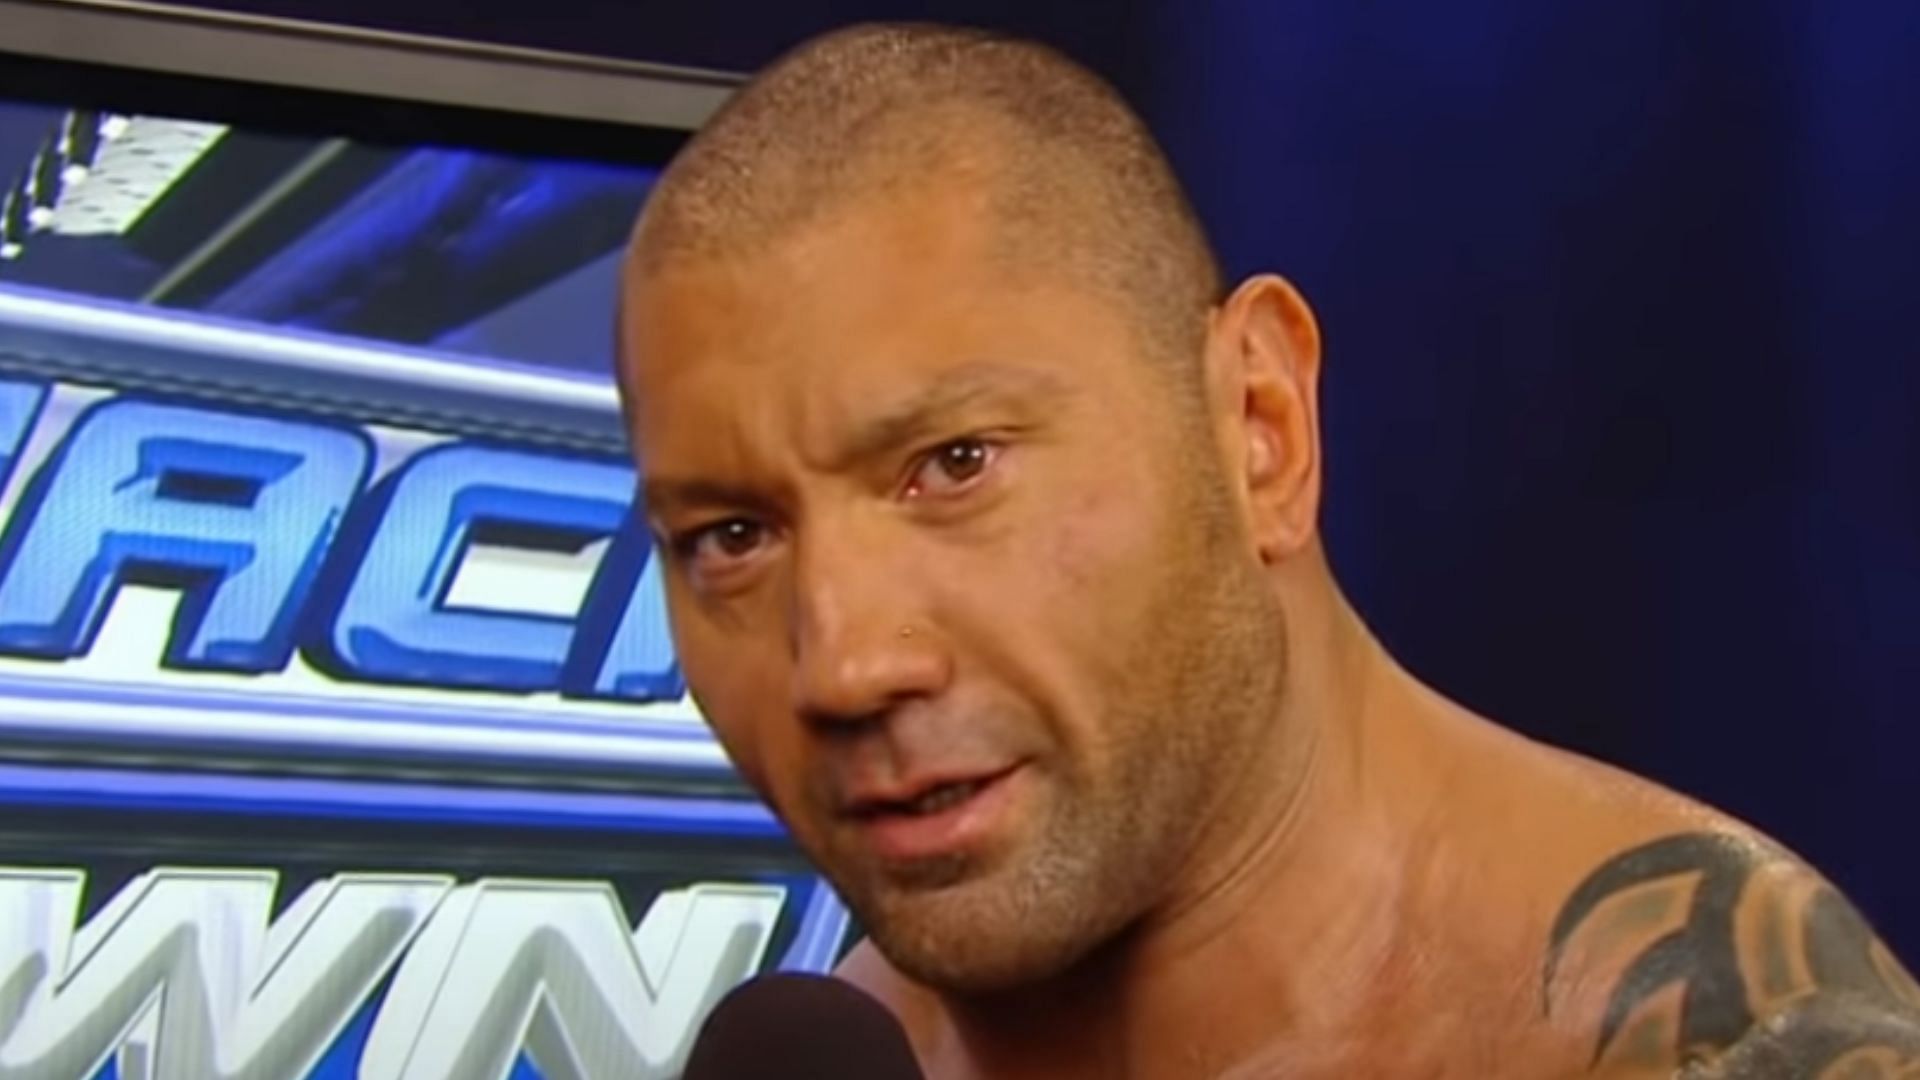 Batista was one of the biggest WWE stars of the 2000s.